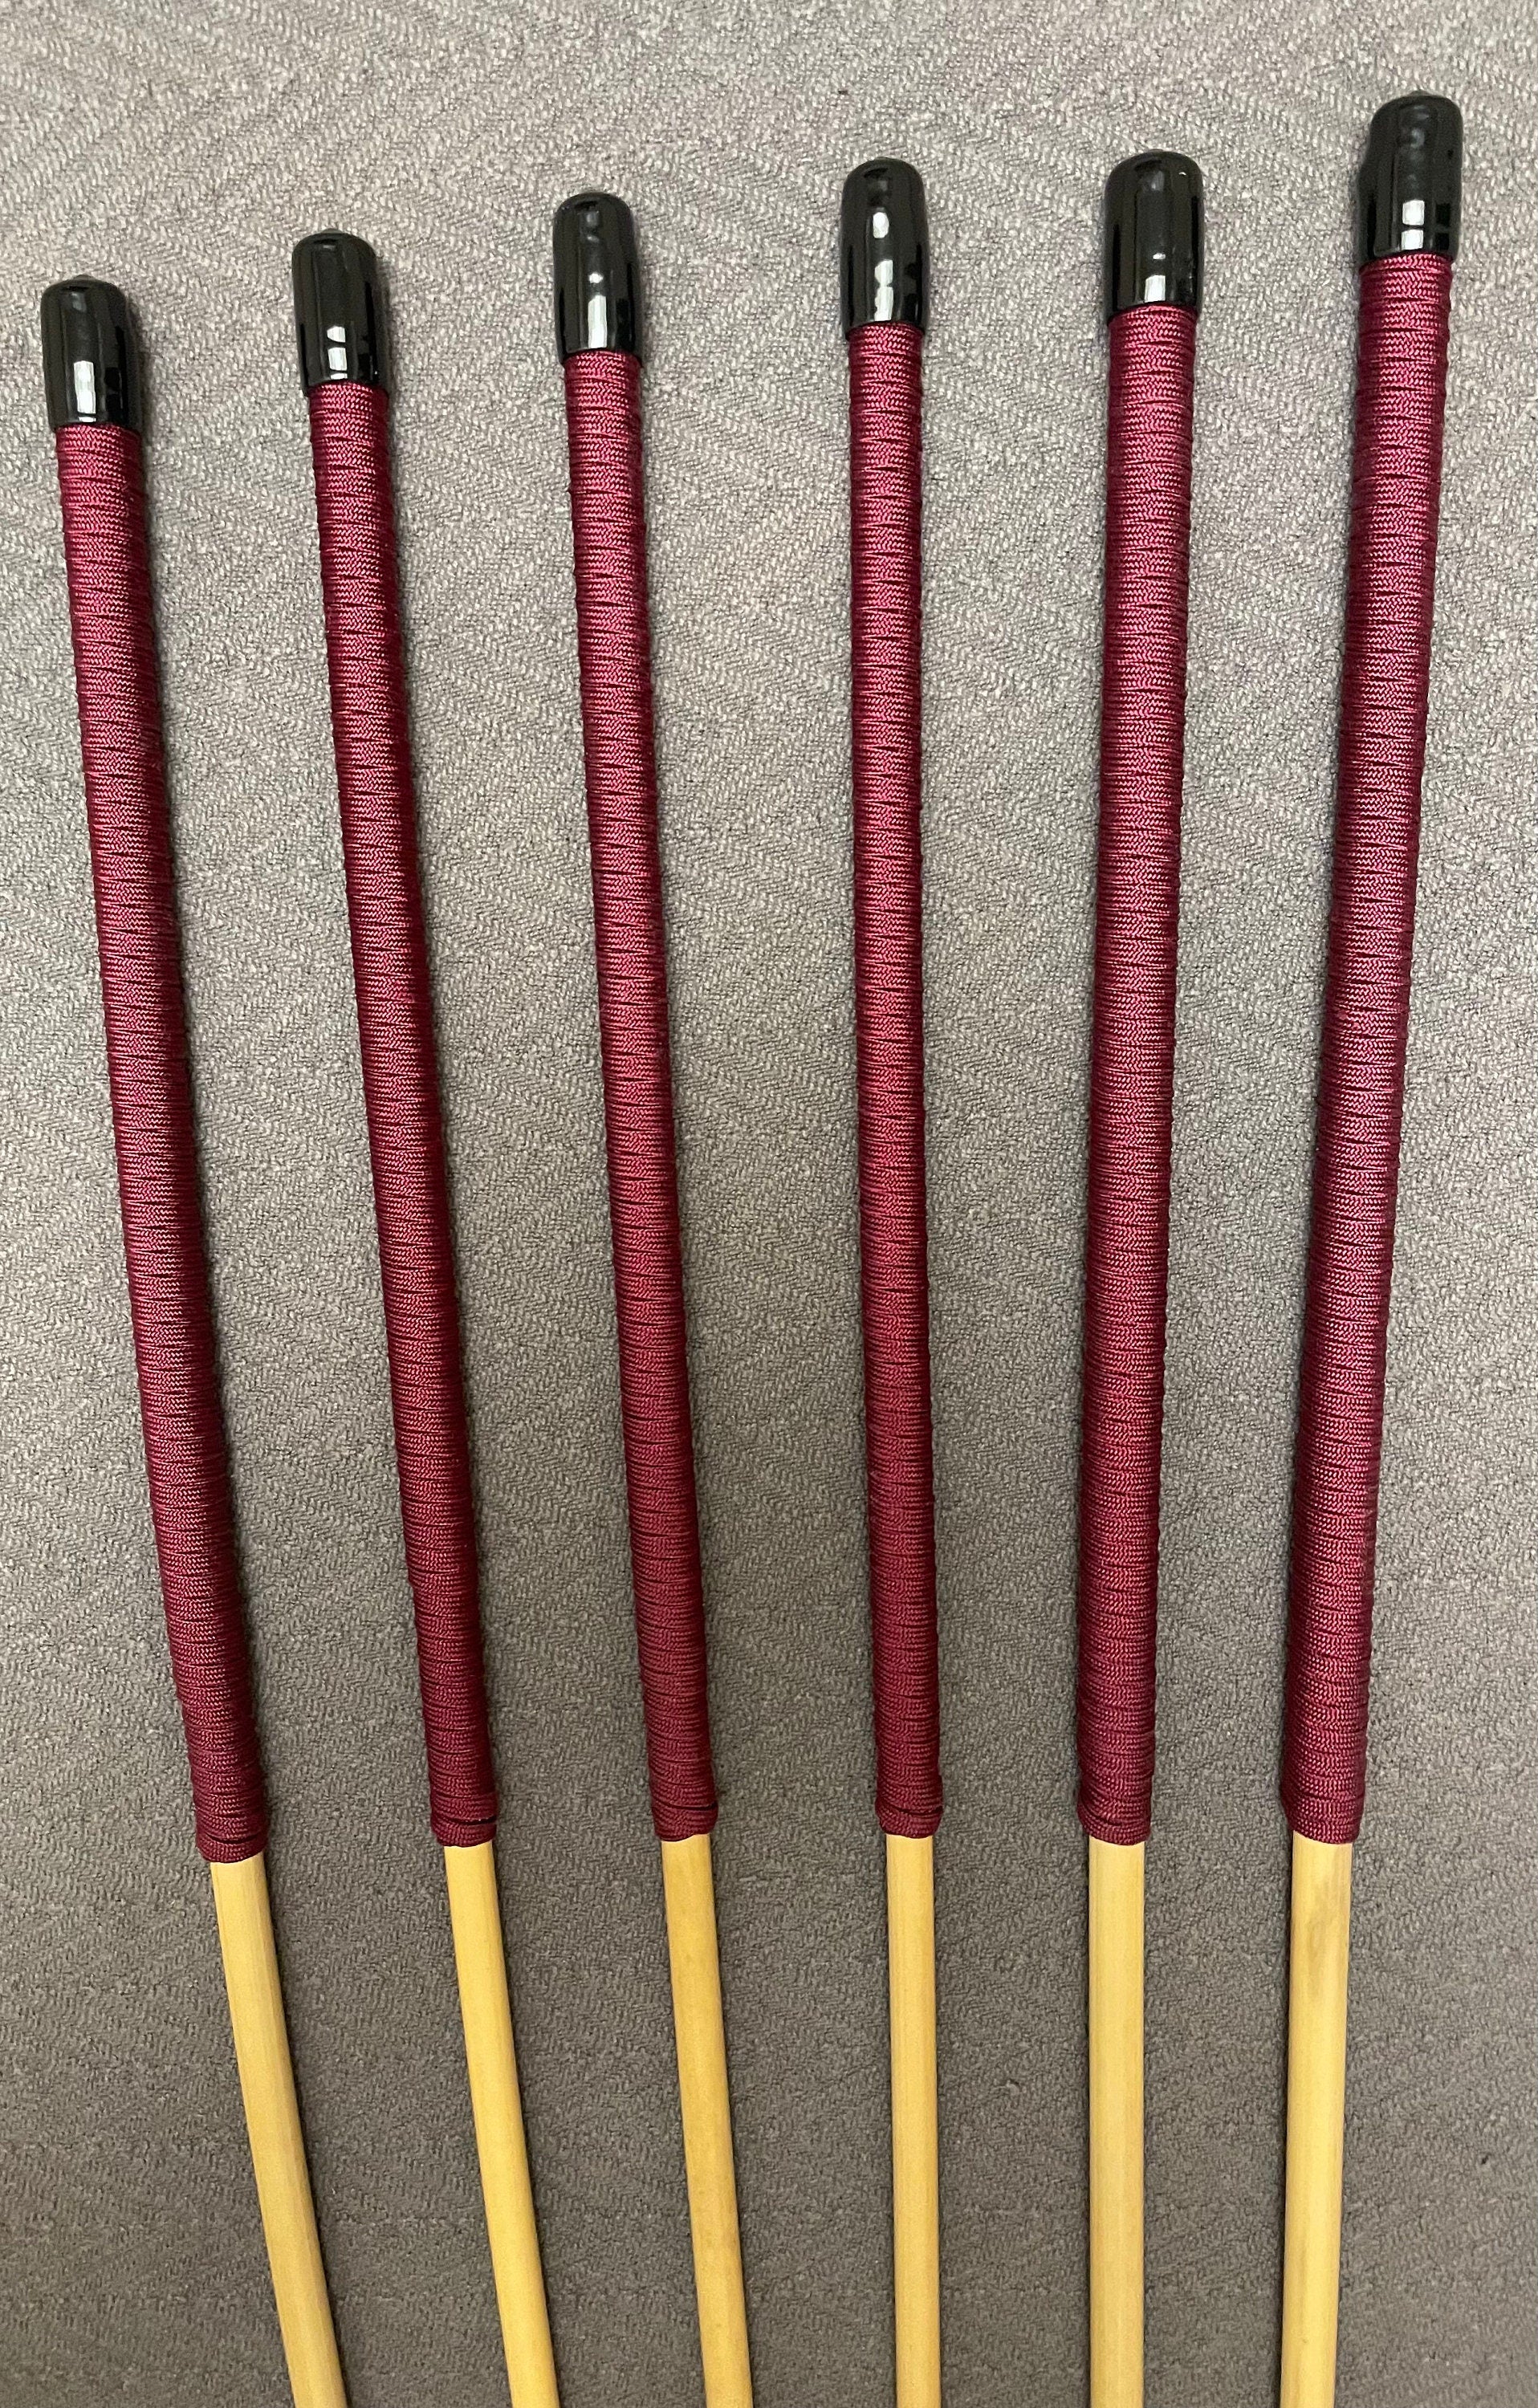 Knotless Dragon Canes / Ultimate Rattan Canes / No Knot Dragon Canes Set of 6 with Burgundy Paracord Handles 85 cms Length